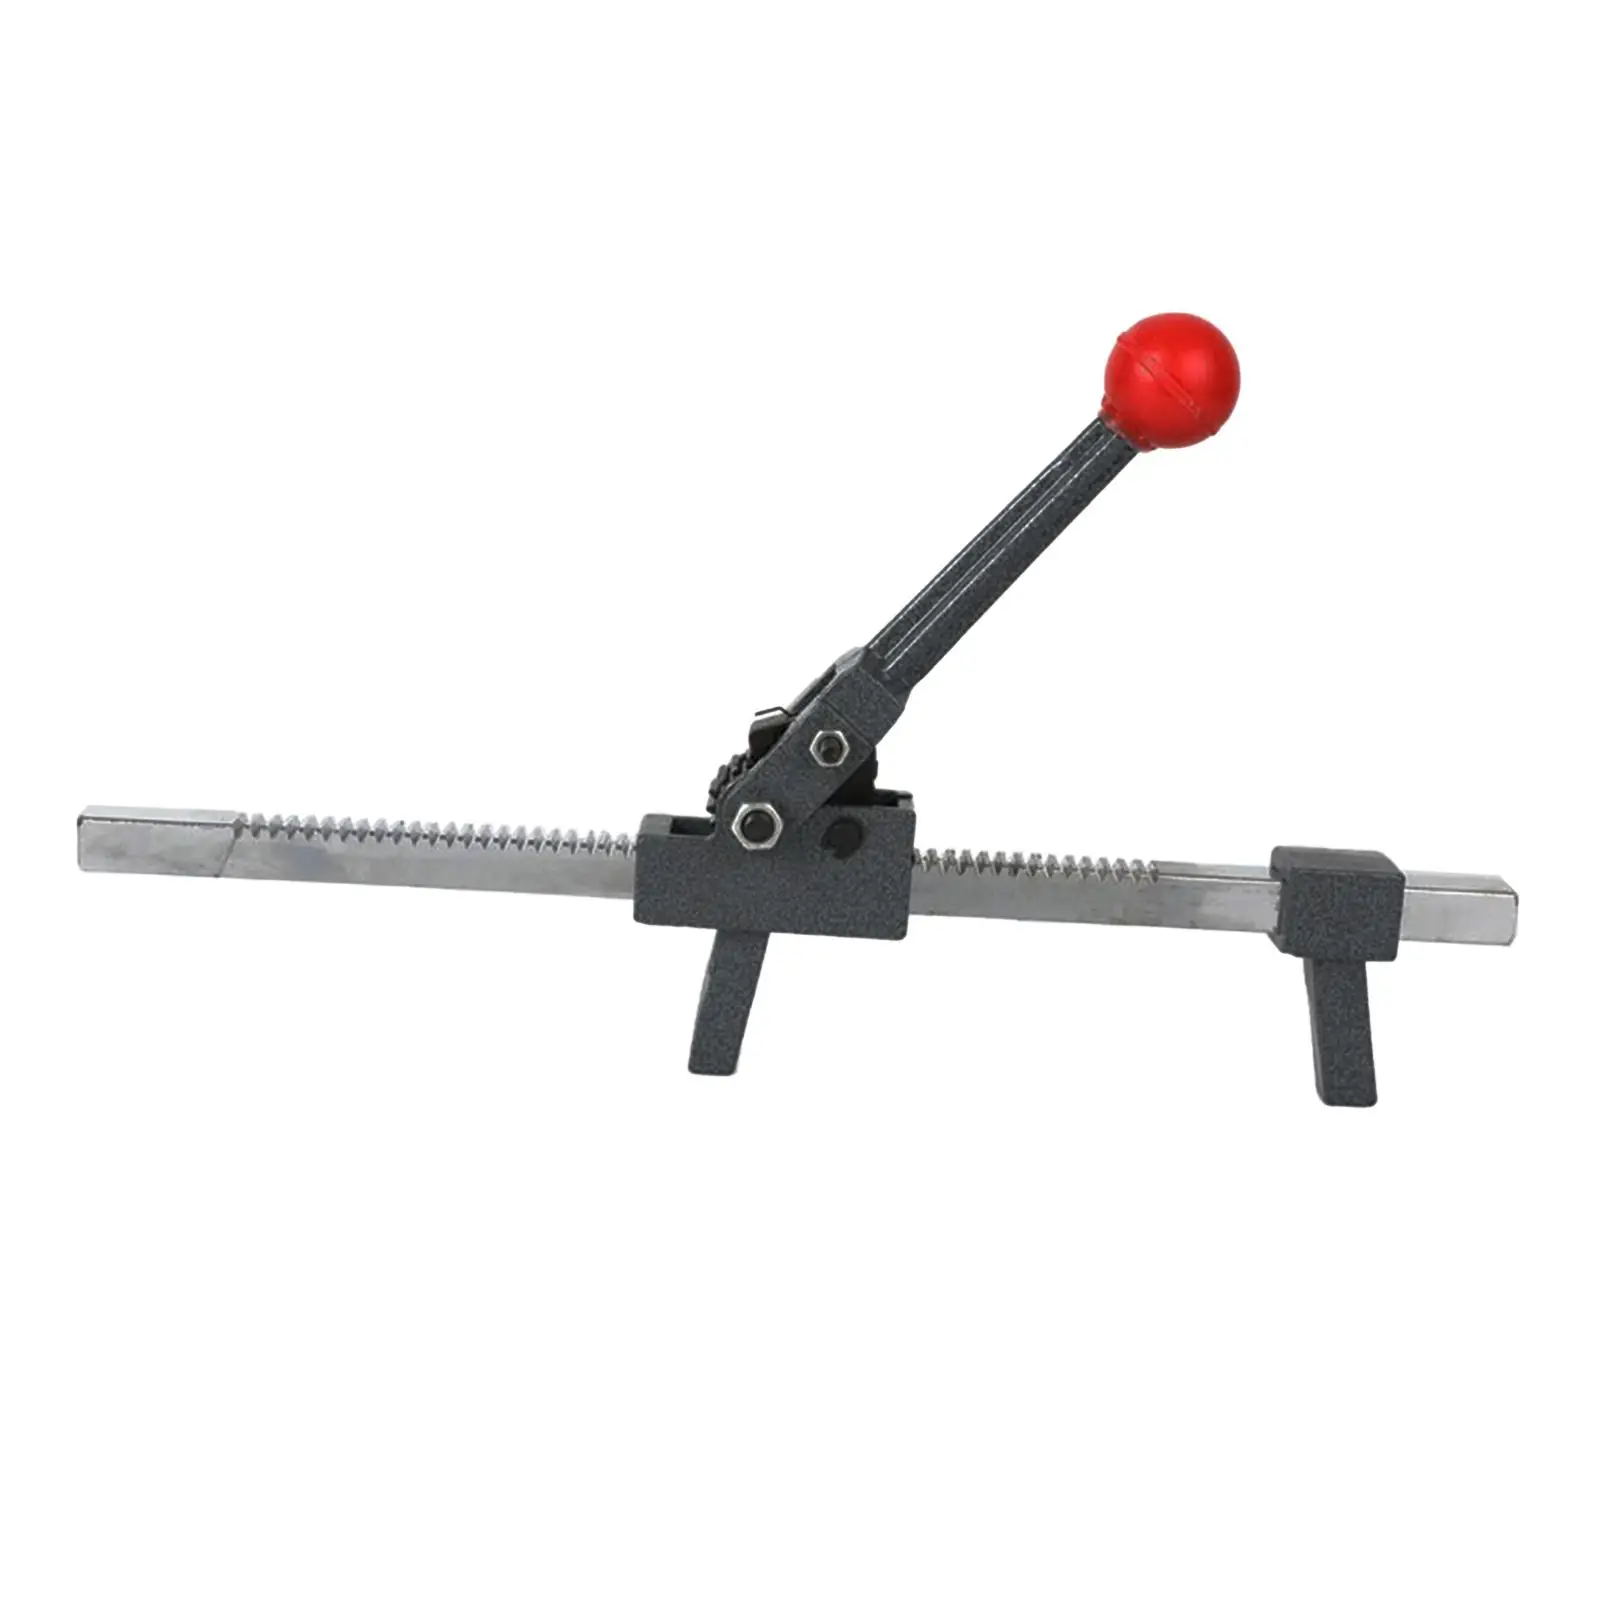 Manual Tire Changer Replaces Bead Breaker Steel Spare Parts Durable for Small Auto Shop Motorcycle Car Accessories Mounting Tool